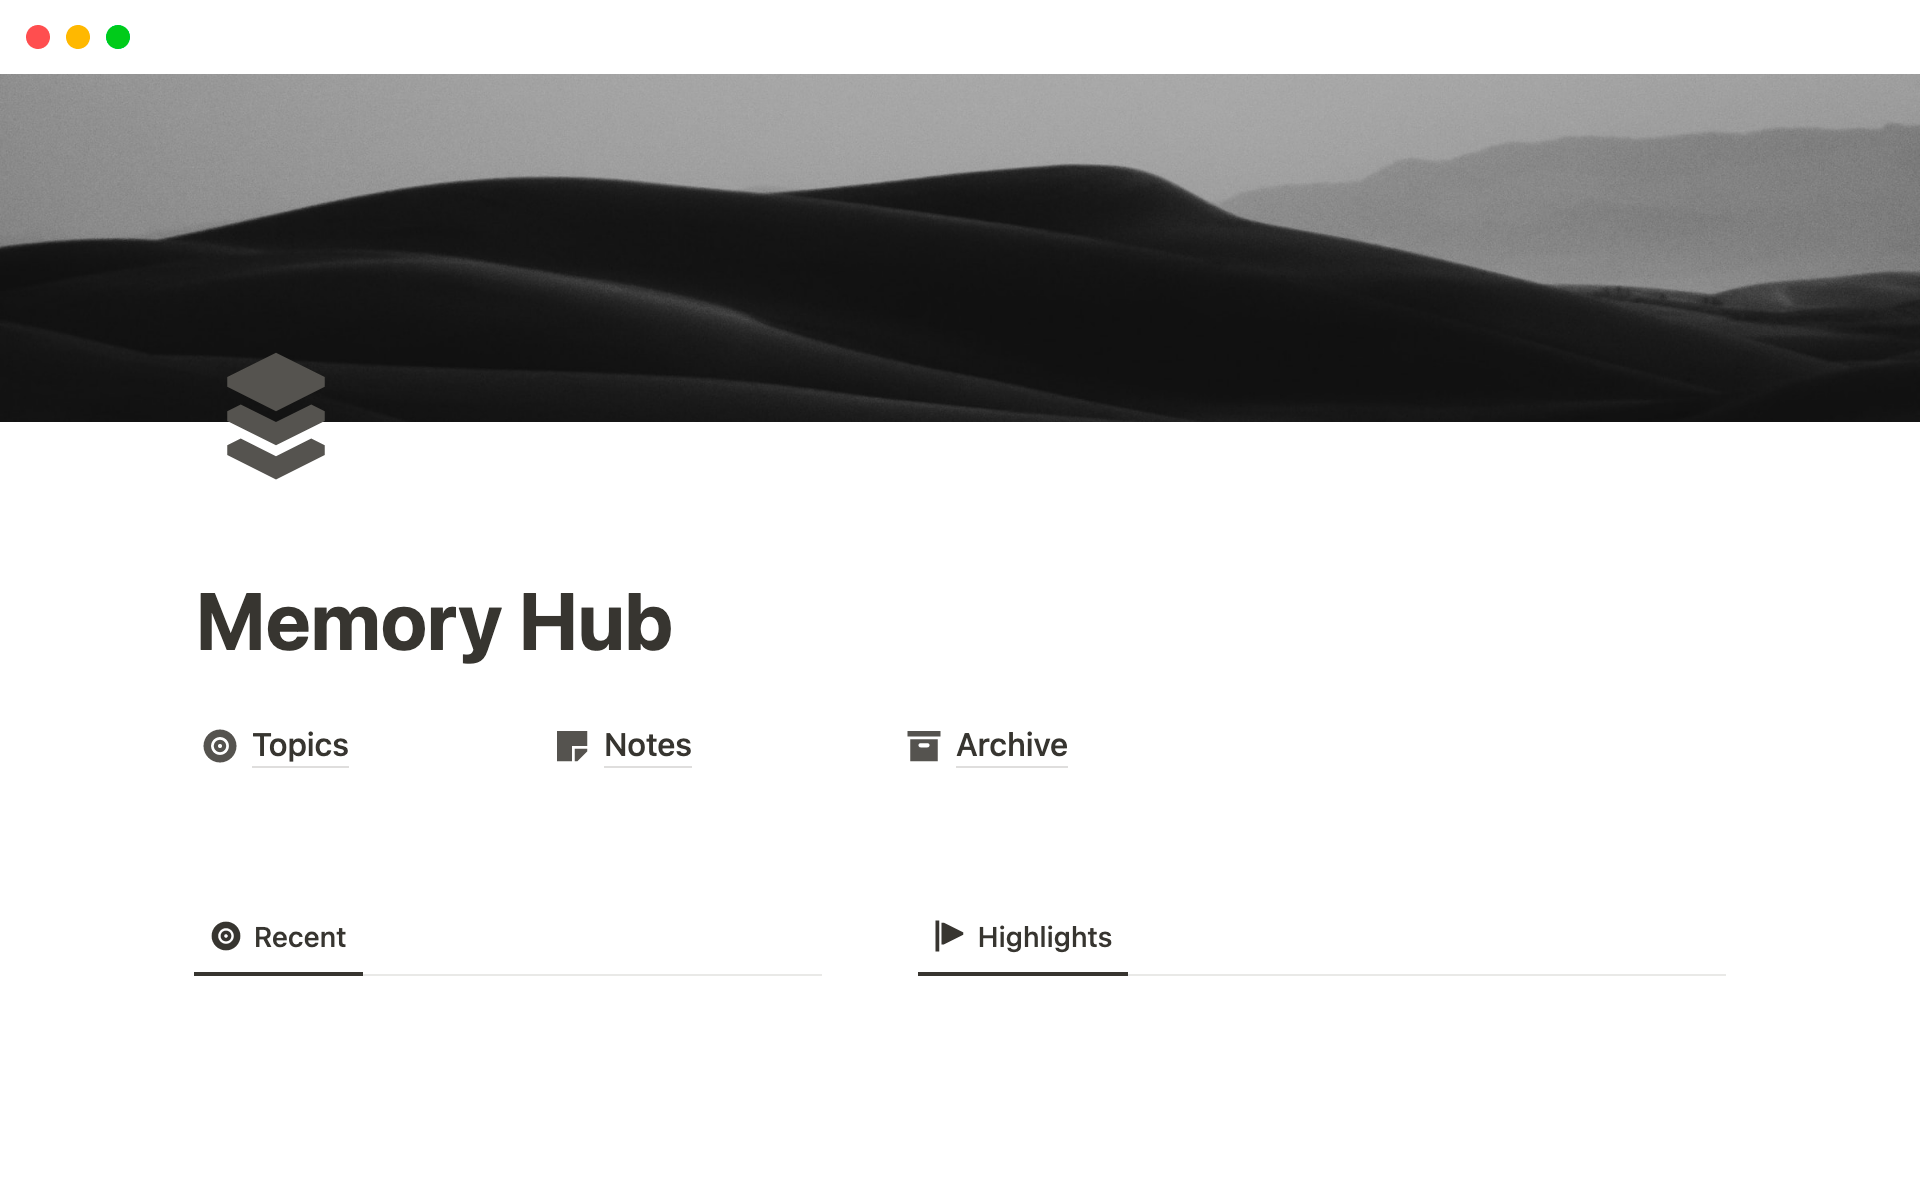 The Notion Memory Hub is a digital tool that helps users organize, remember, and archive notes and topics related to the content they consume.